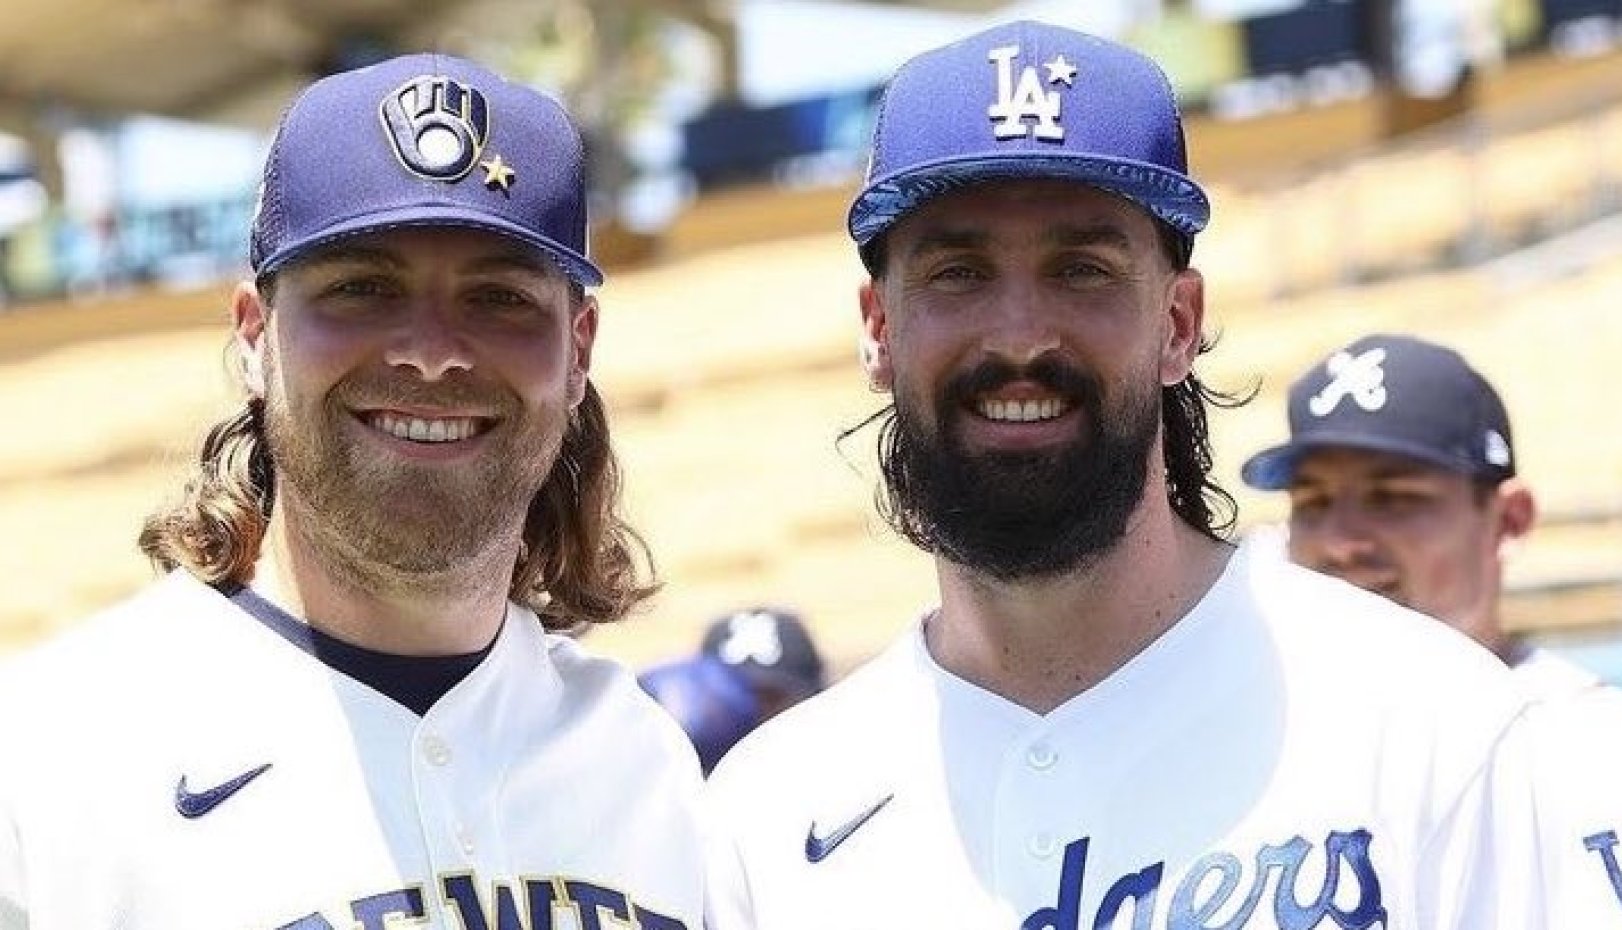 Dodgers vs. Brewers: College teammates Gonsolin, Burnes face off